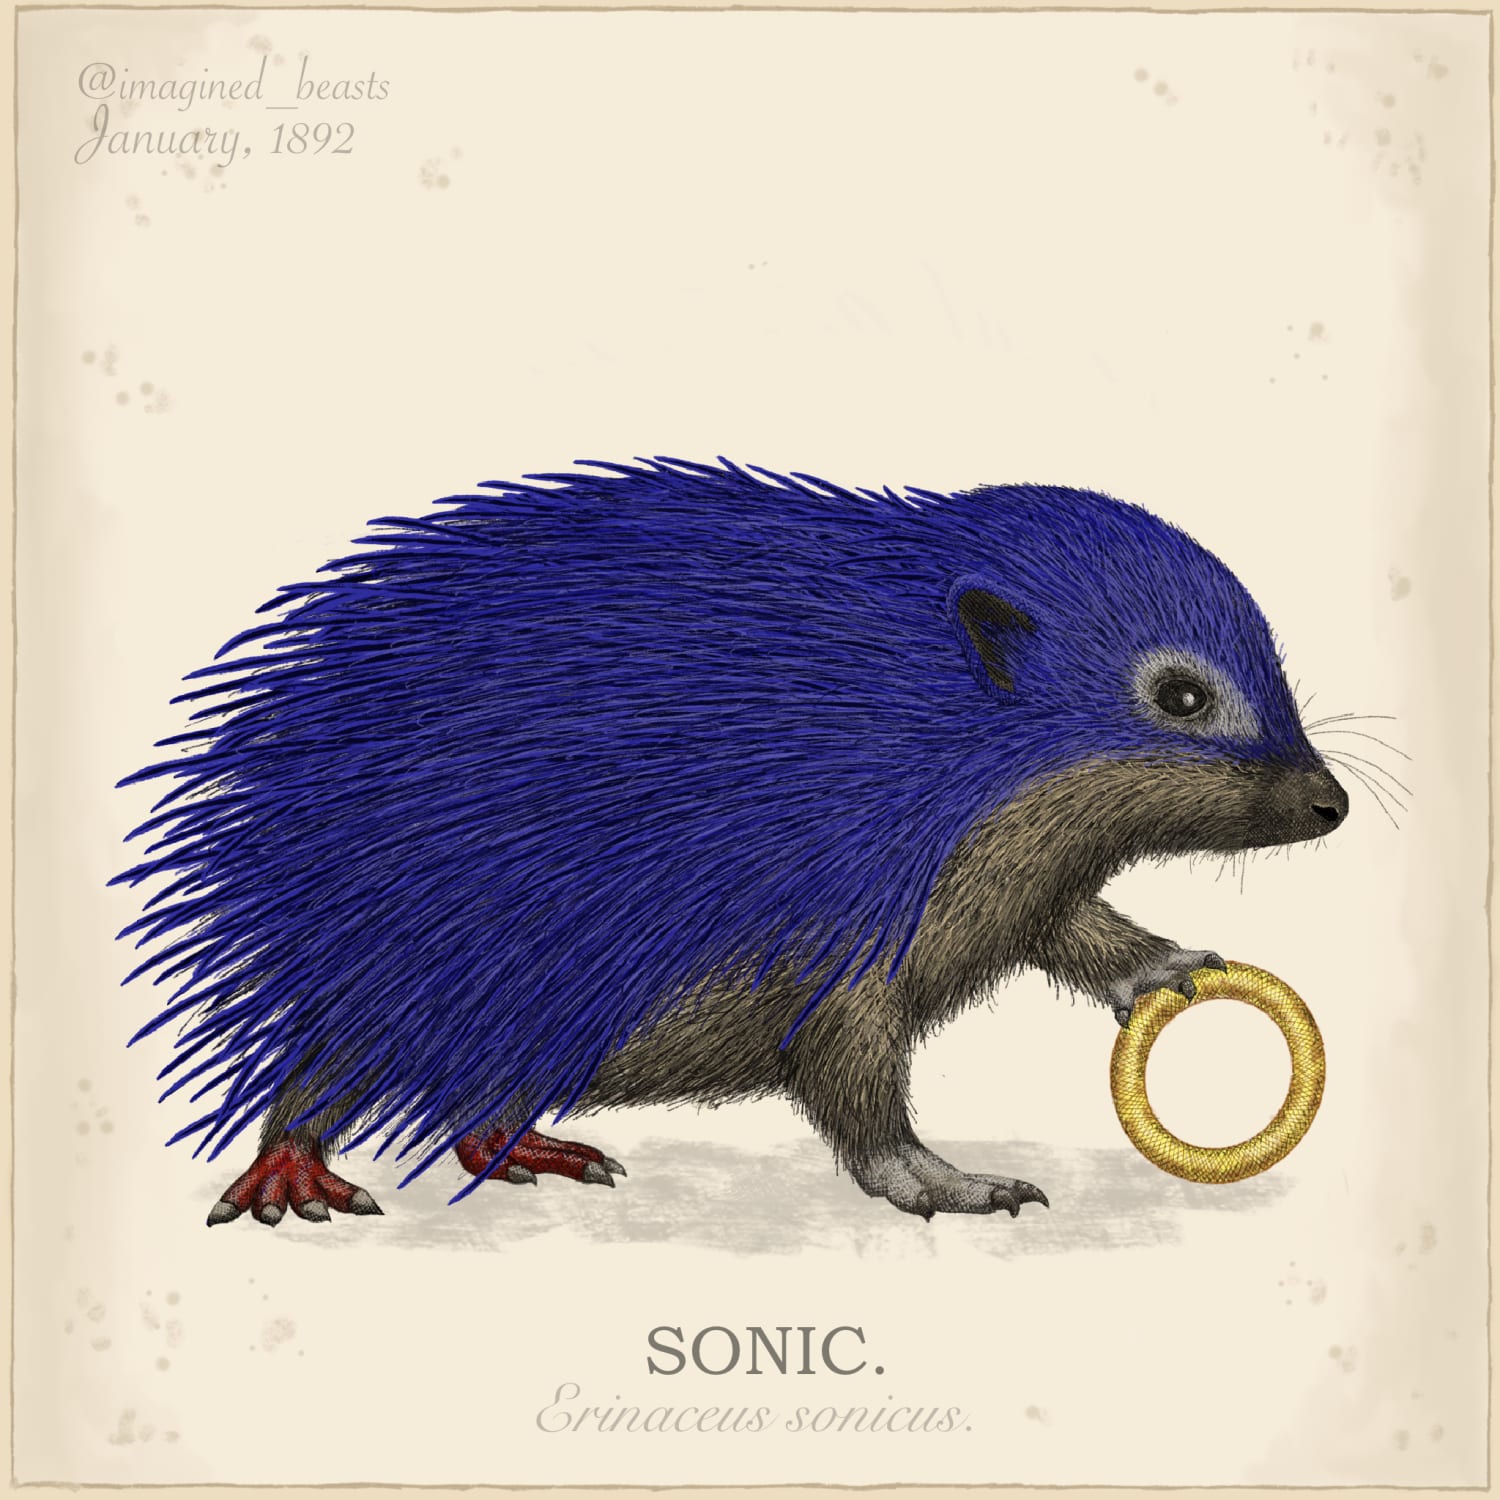 I draw realistic versions of the animals found in video games. This is my take on Sonic the Hedgehog. Full explanation in the comments.